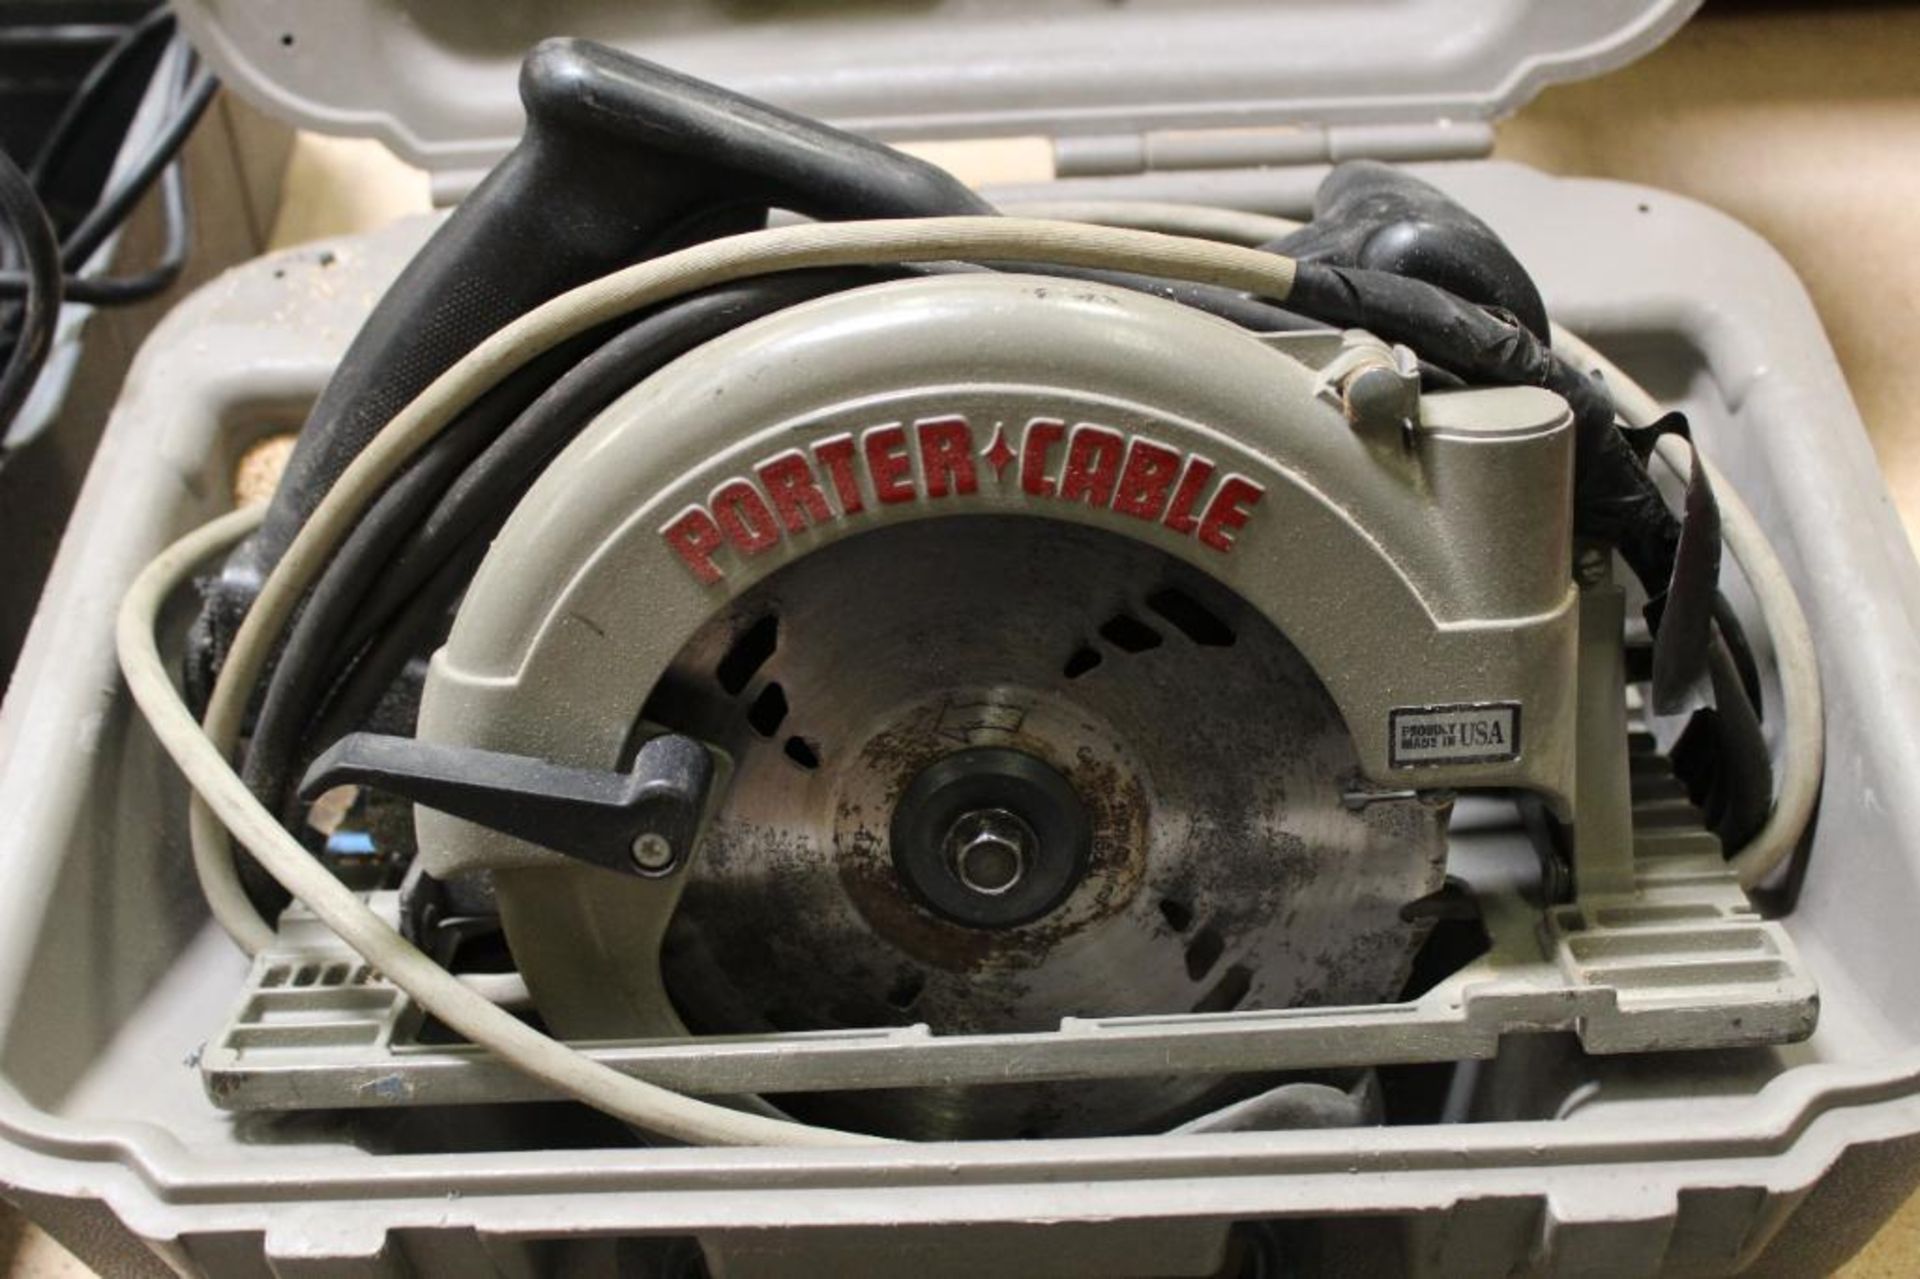 Porter Cable Circular Saw 7-1/4" Model 347 - Image 4 of 6